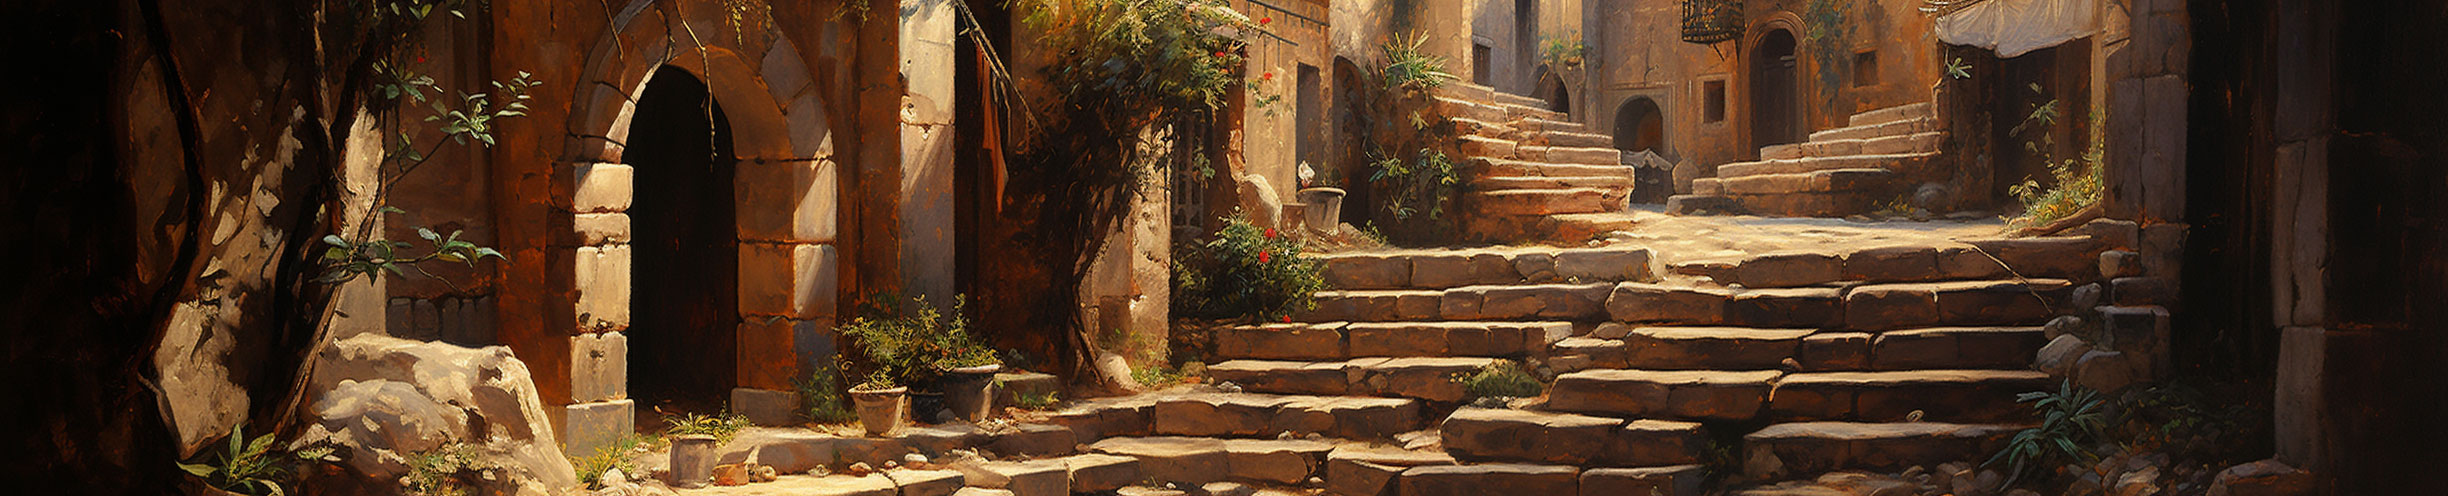 tychodreq_a_finely_detailed_oil_painting_of_a_stone_stairs_lead_d71c1ccb-afb8-47e5-9a8a-91c40730521f.jpg